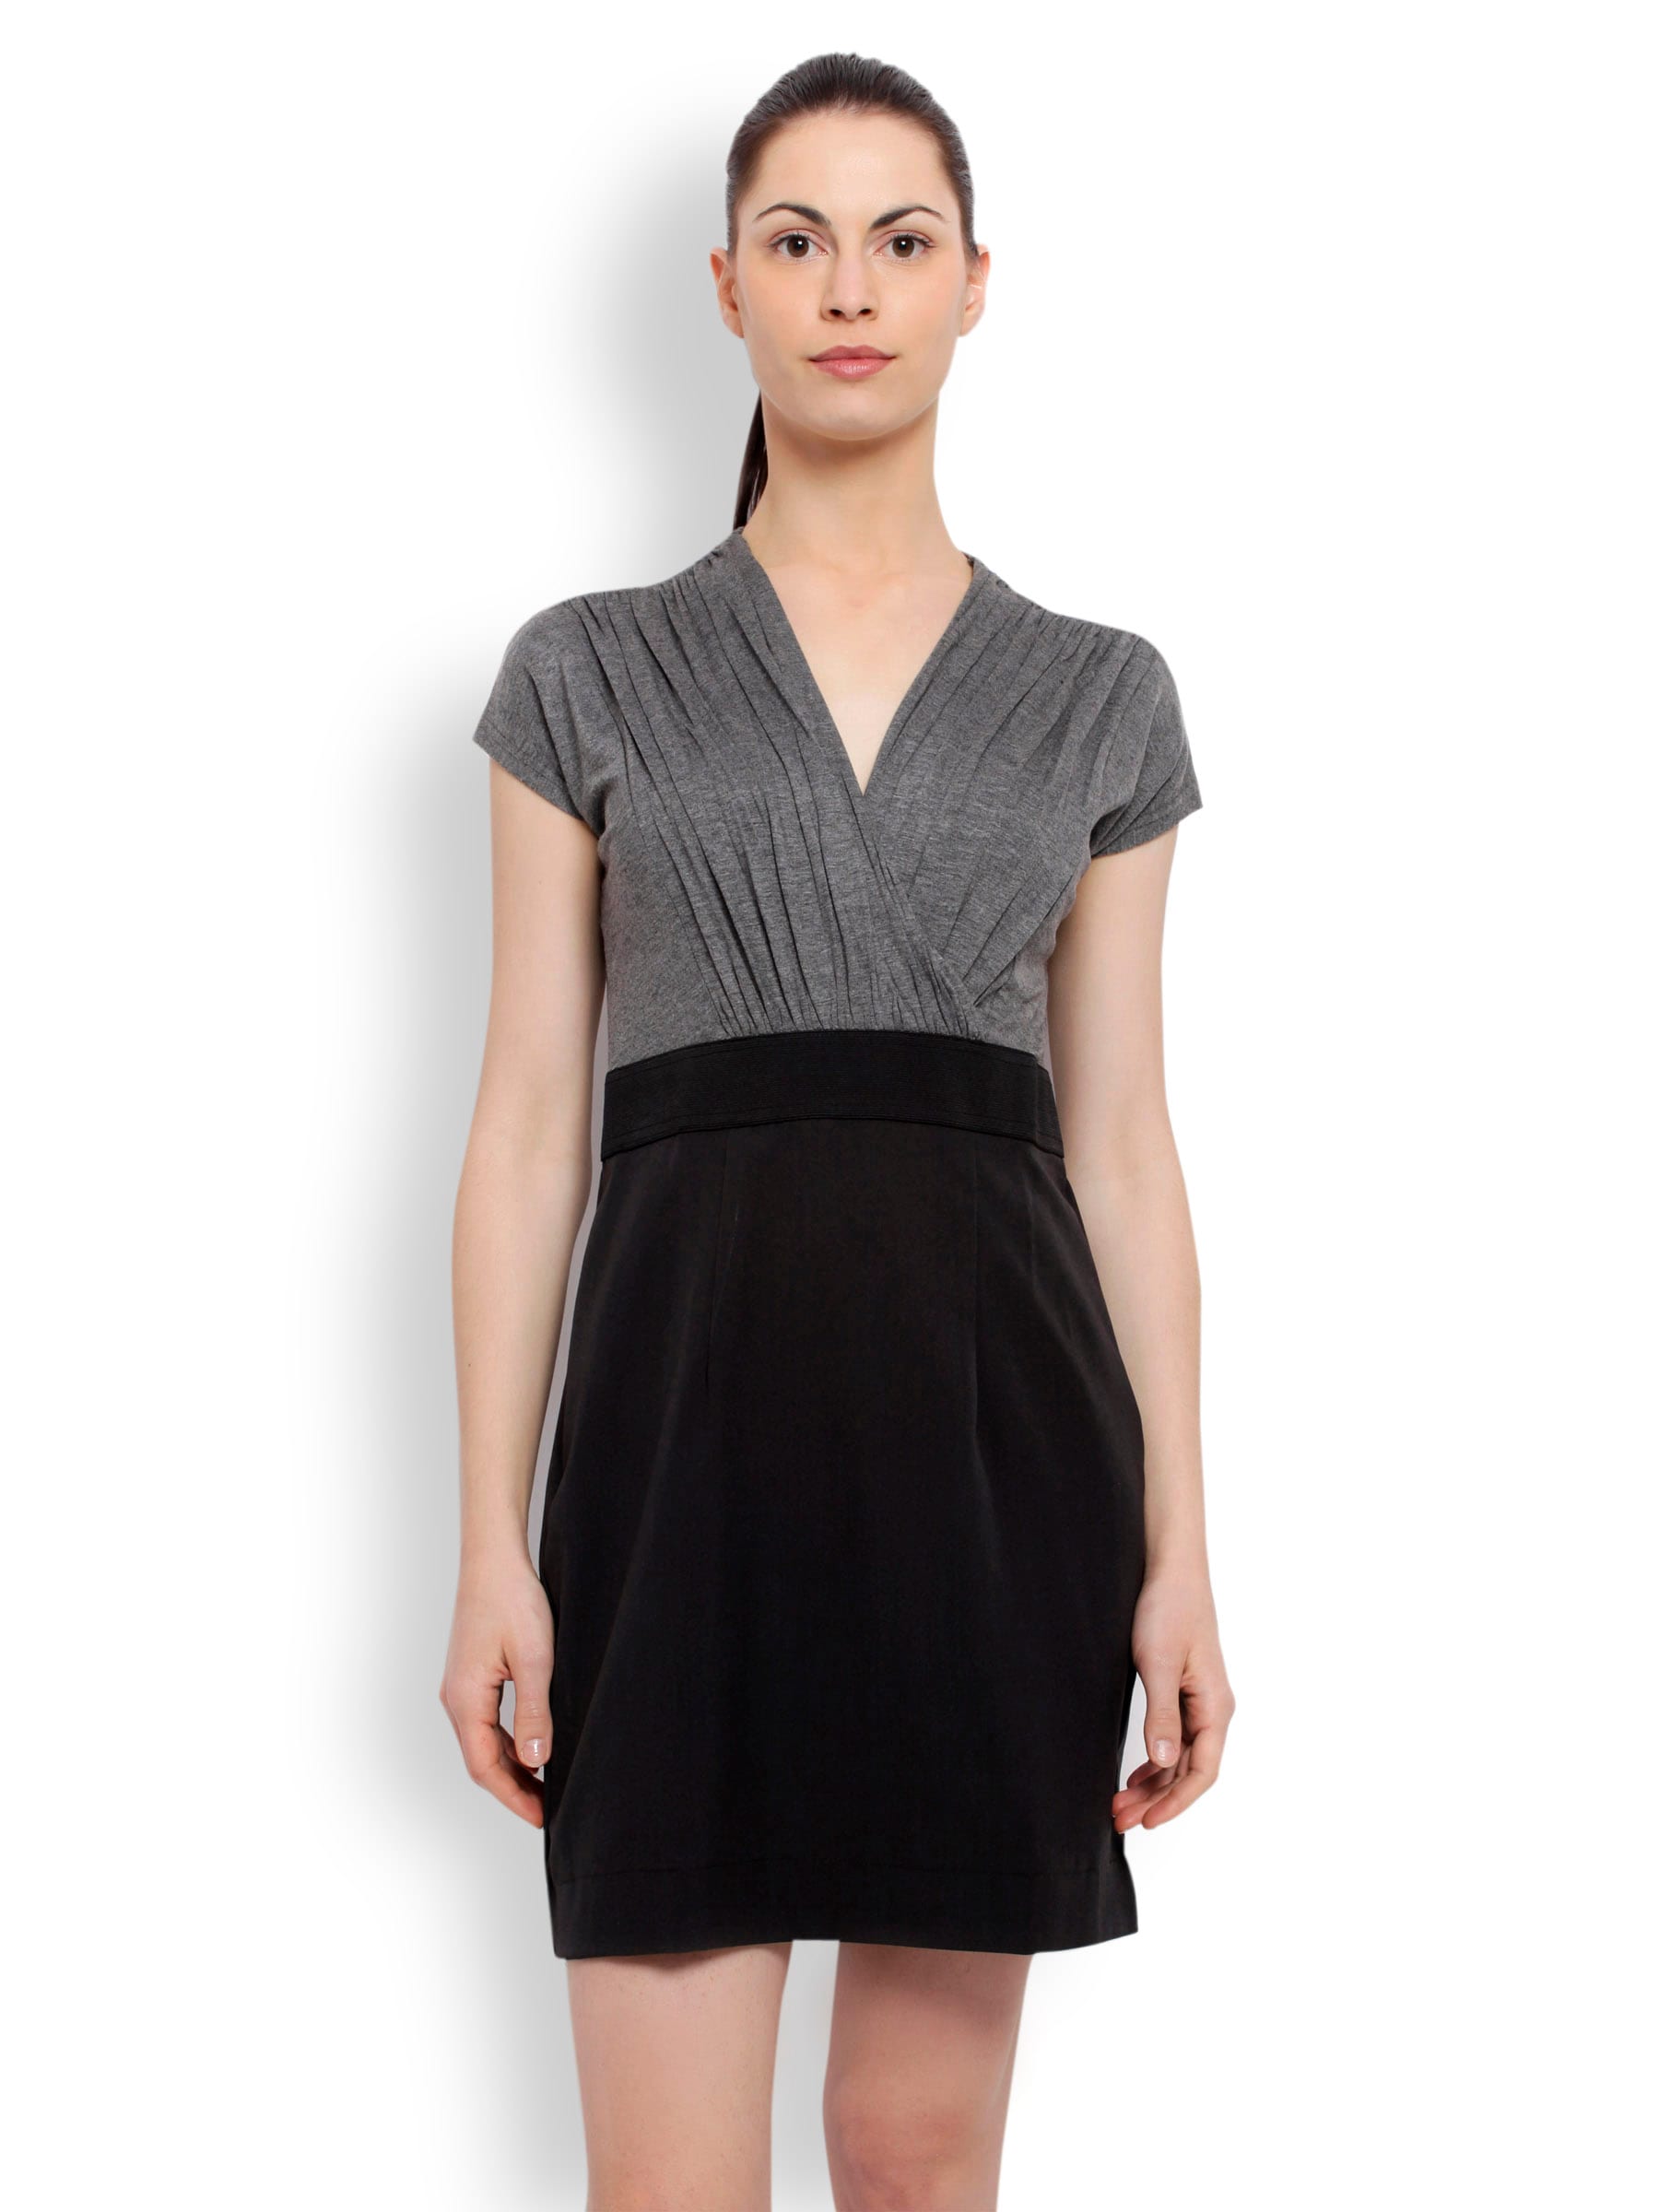 AND Women Solid Grey and Black Dress